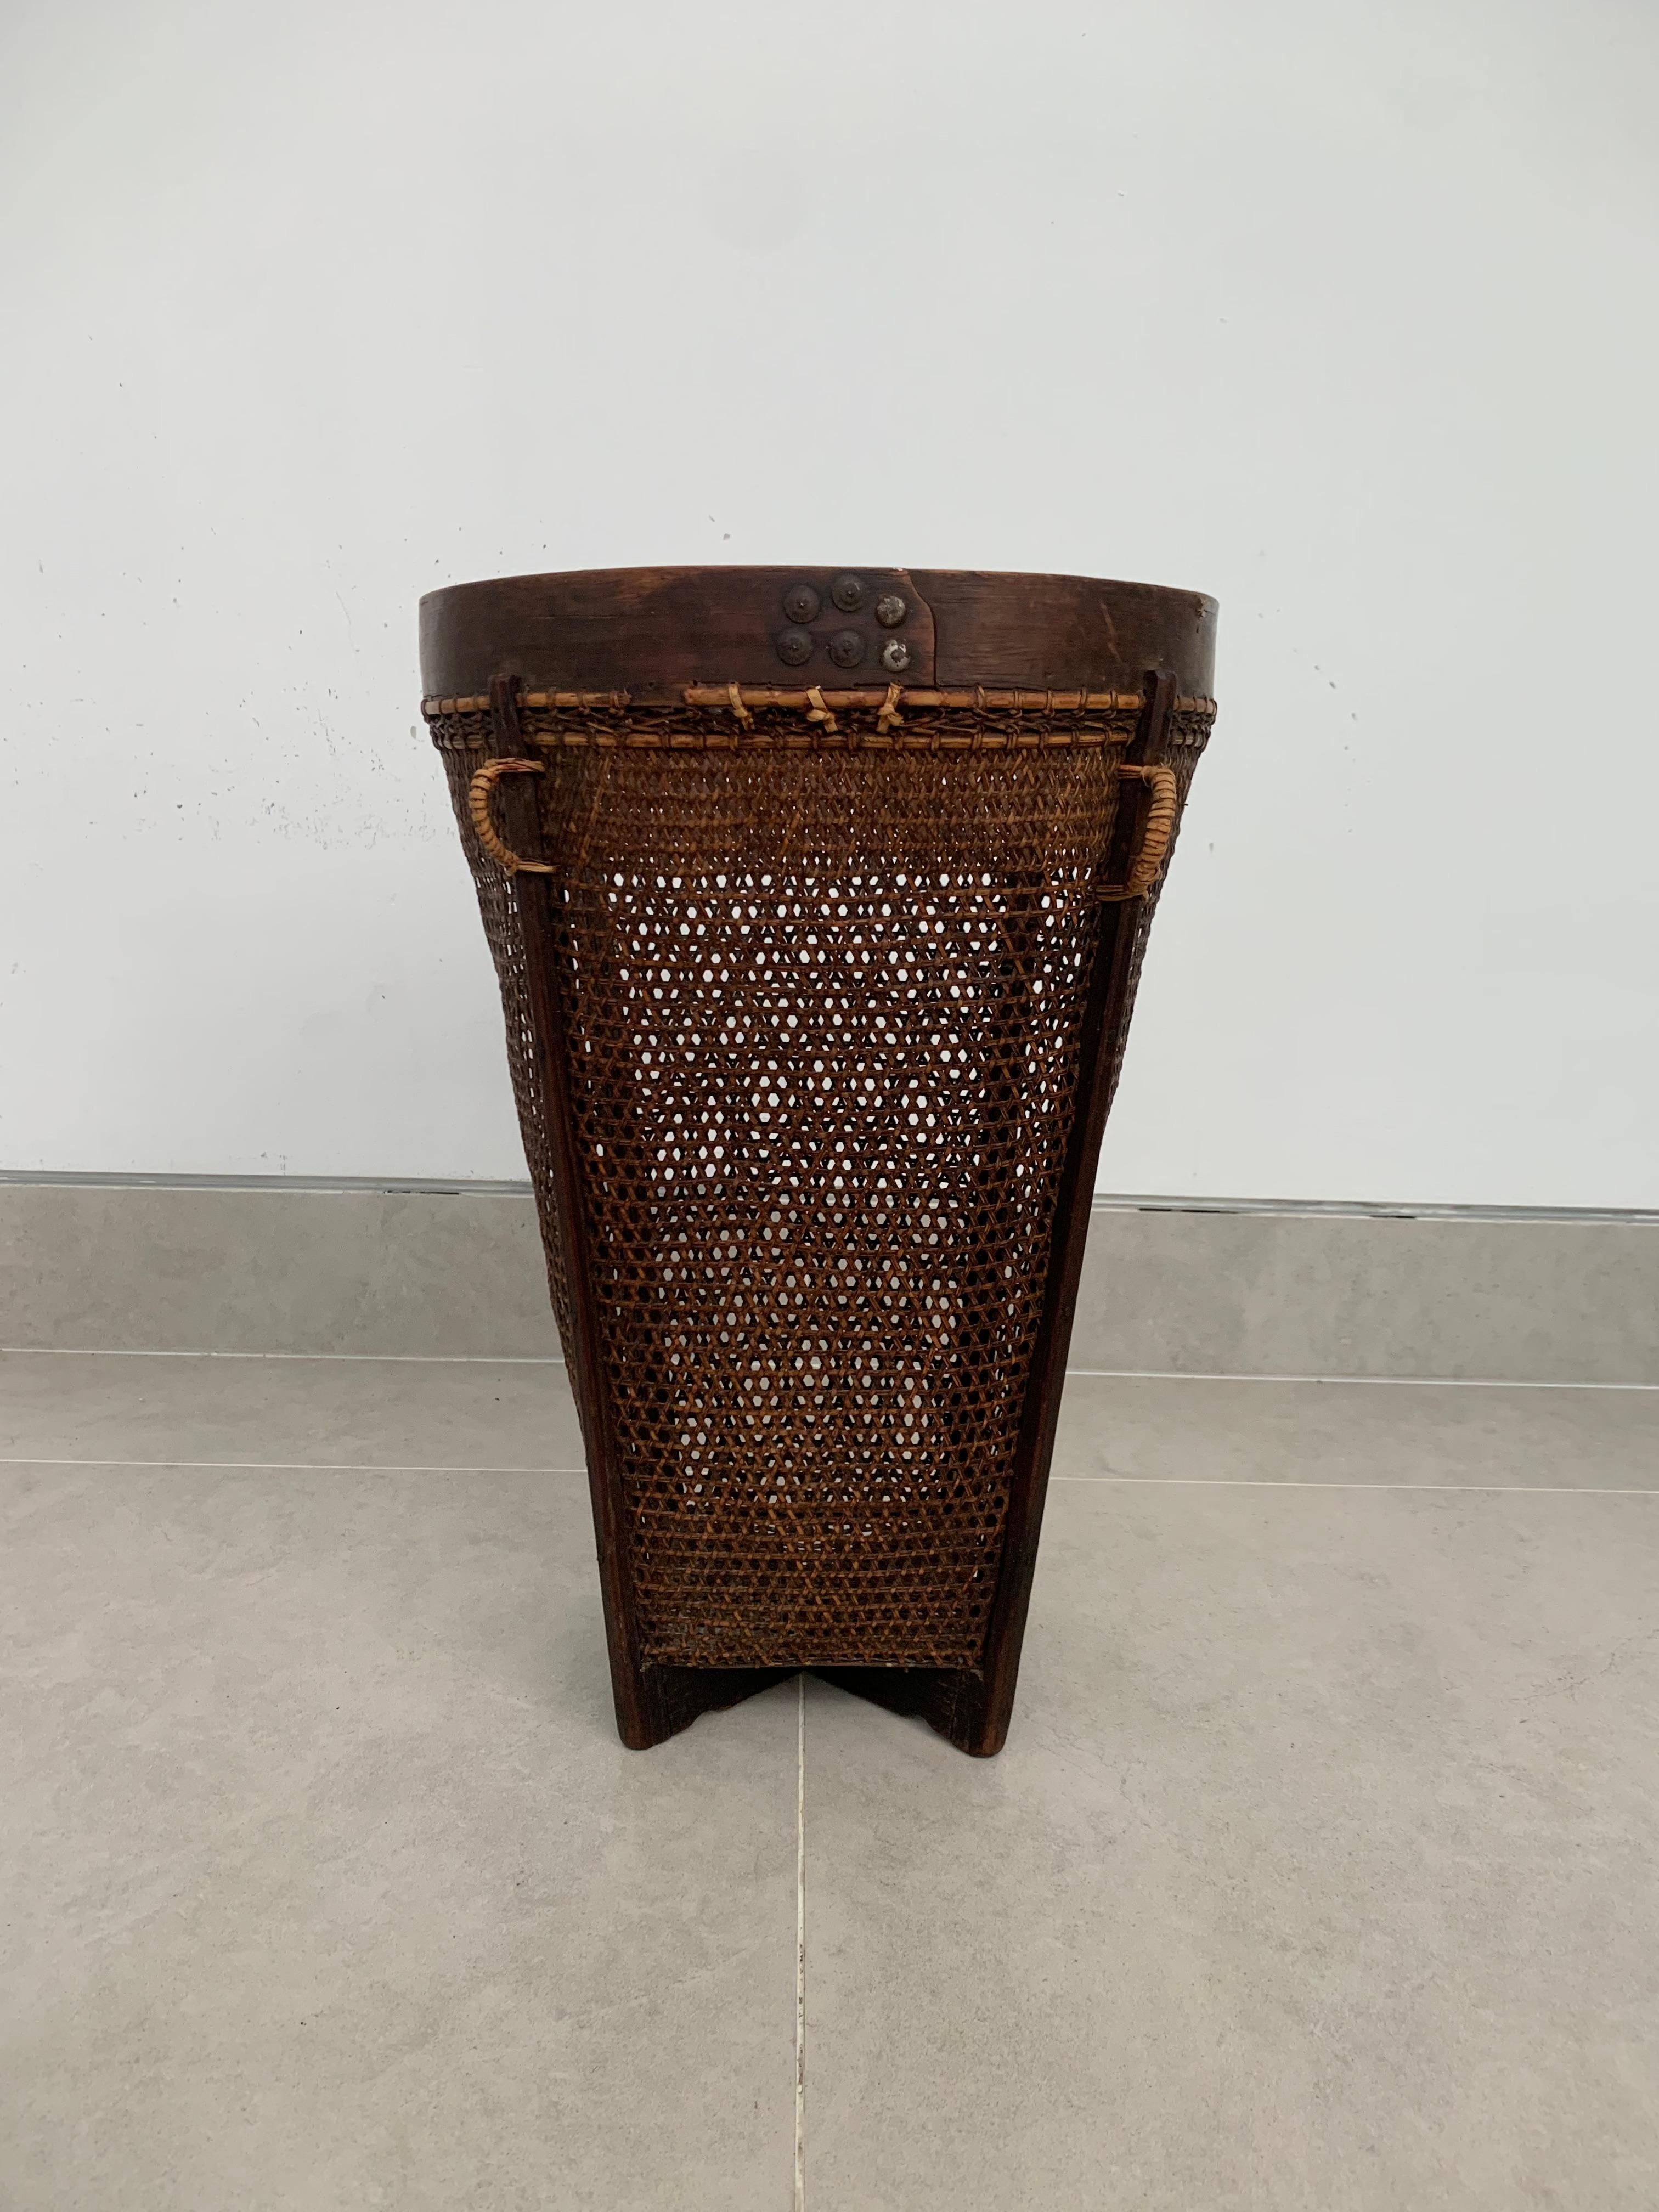 Other Rattan Basket Dayak Tribe Hand-Woven from Kalimantan, Borneo, Mid 20th Century For Sale